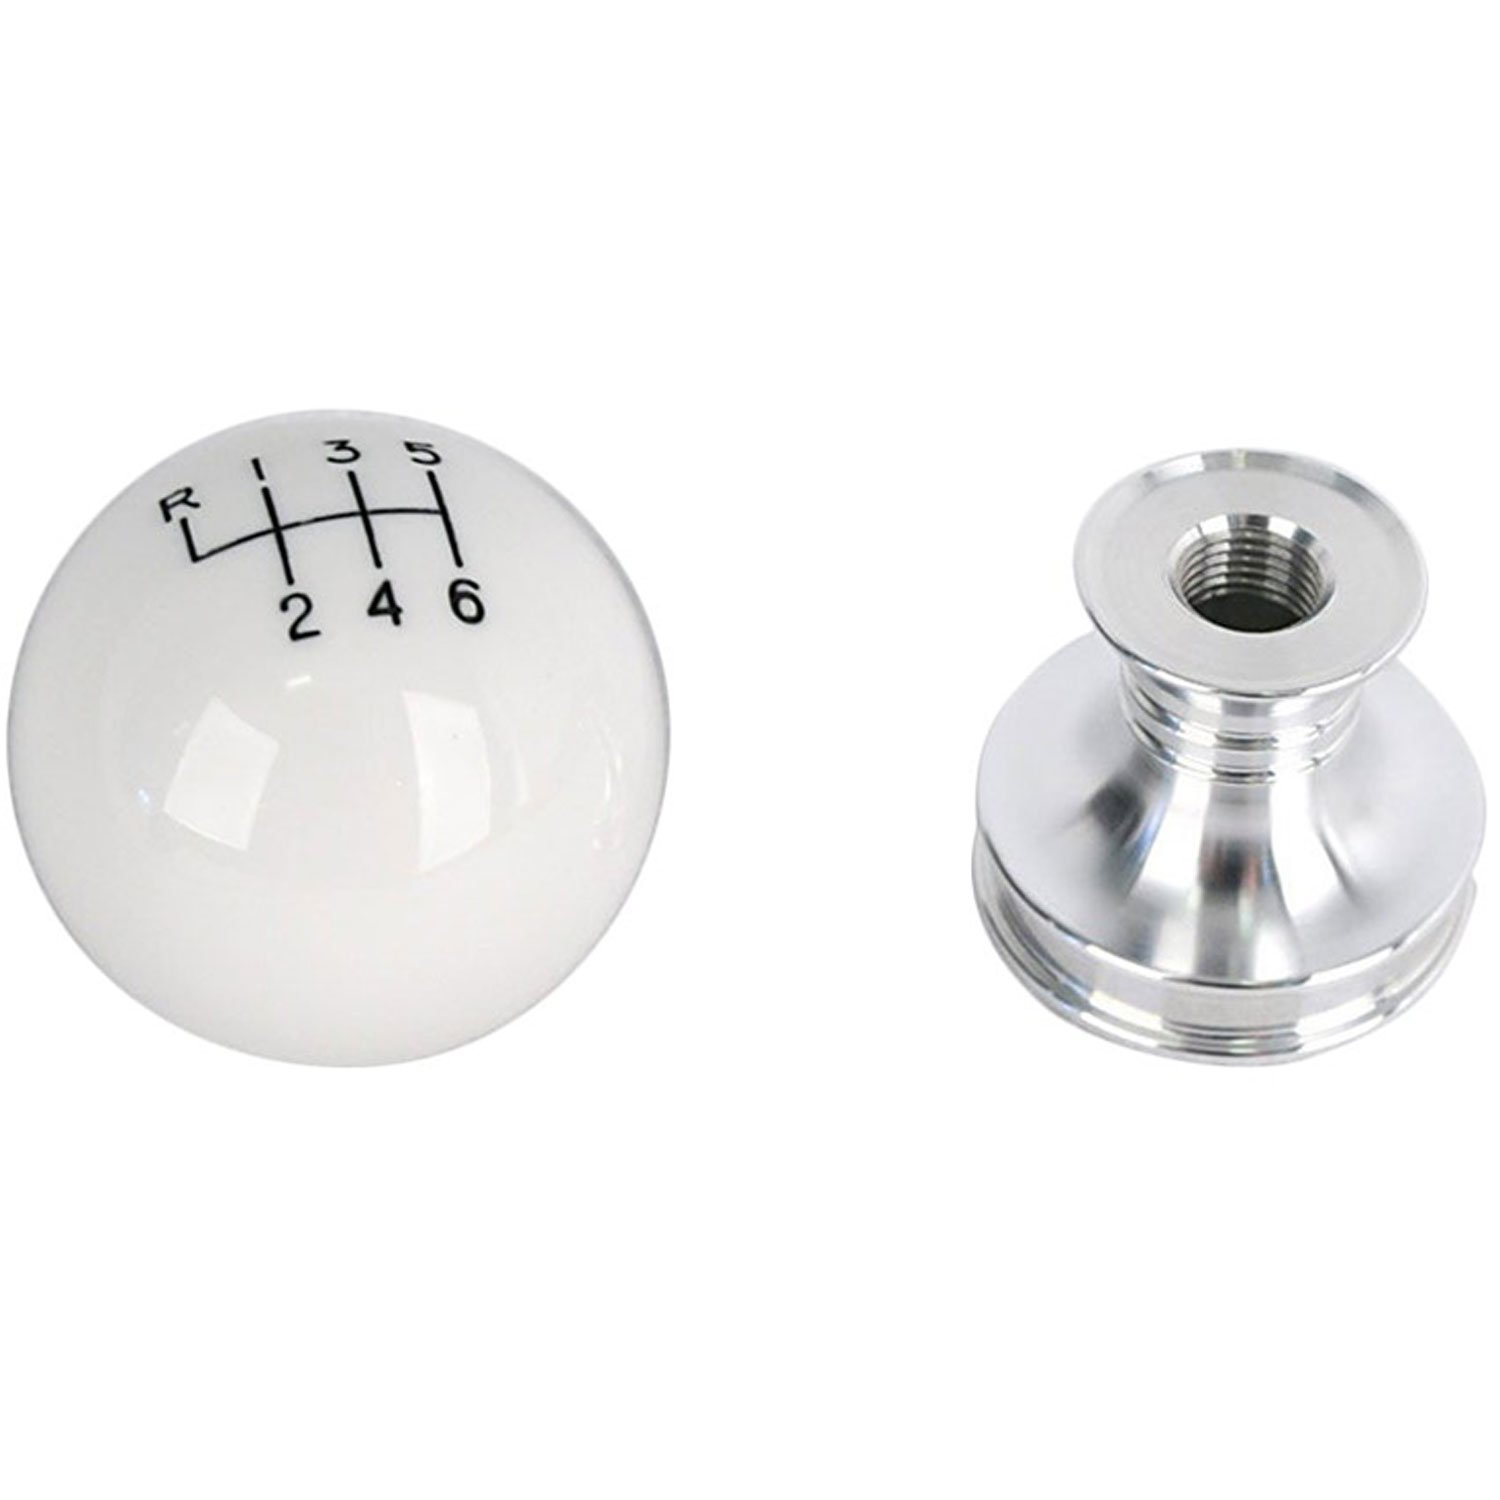 White Engraved Shift knob and adapter for 2011+ Mustang